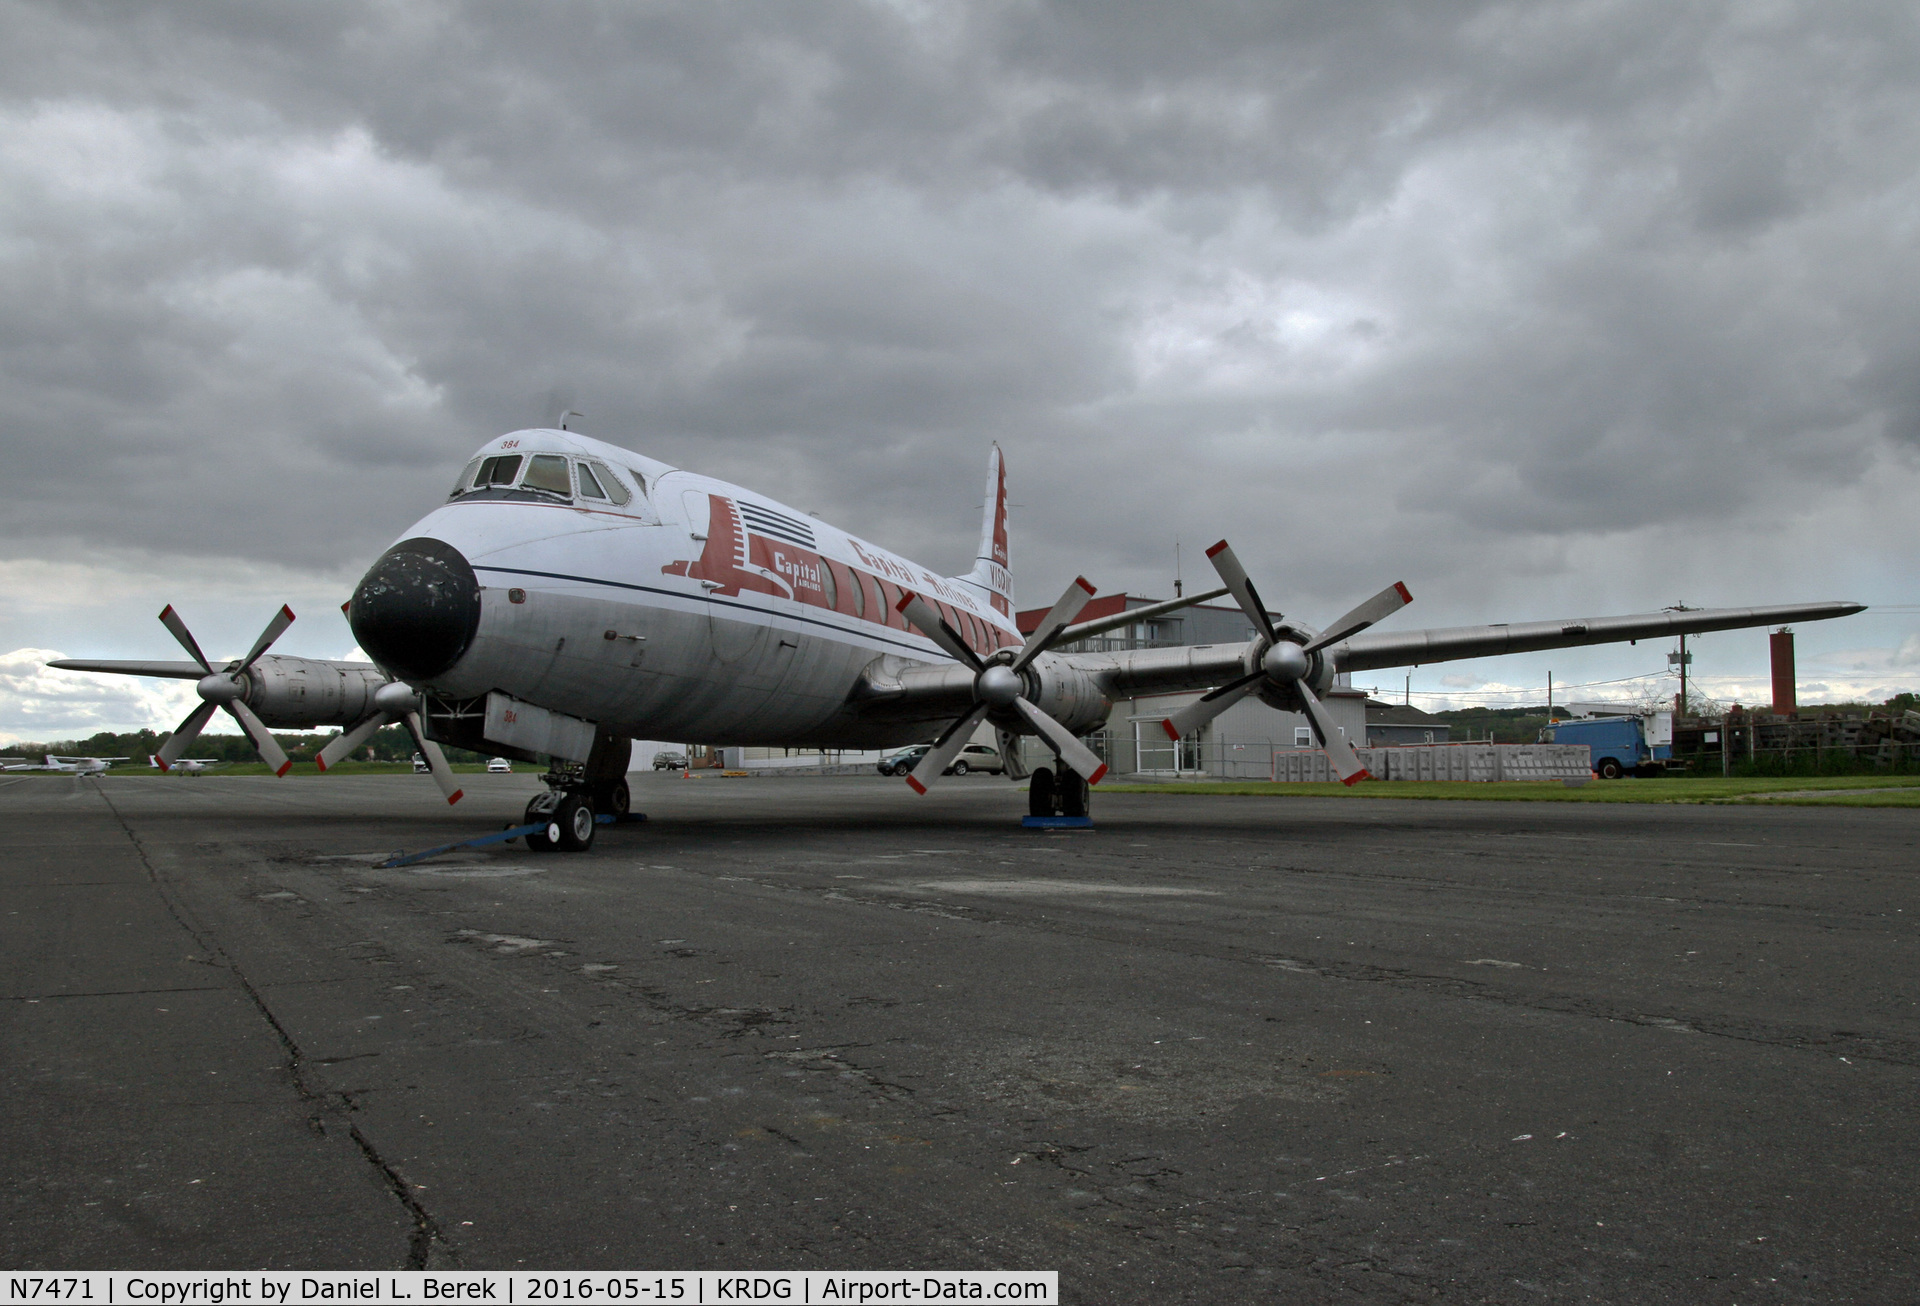 N7471, 1957 Vickers Viscount 797 C/N 233, A classic Viscount sits on the ramp under a threatening sky.  She was built in 1957.